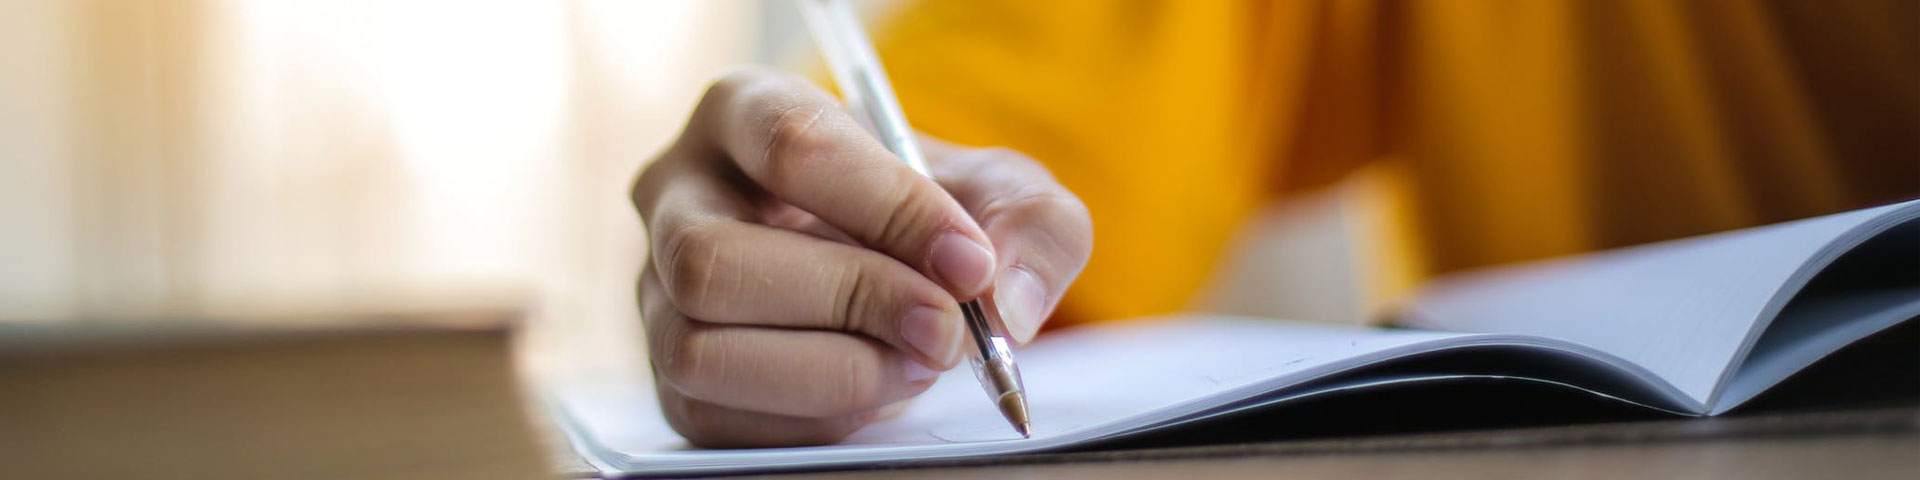 Person writing with a pen in a notebook